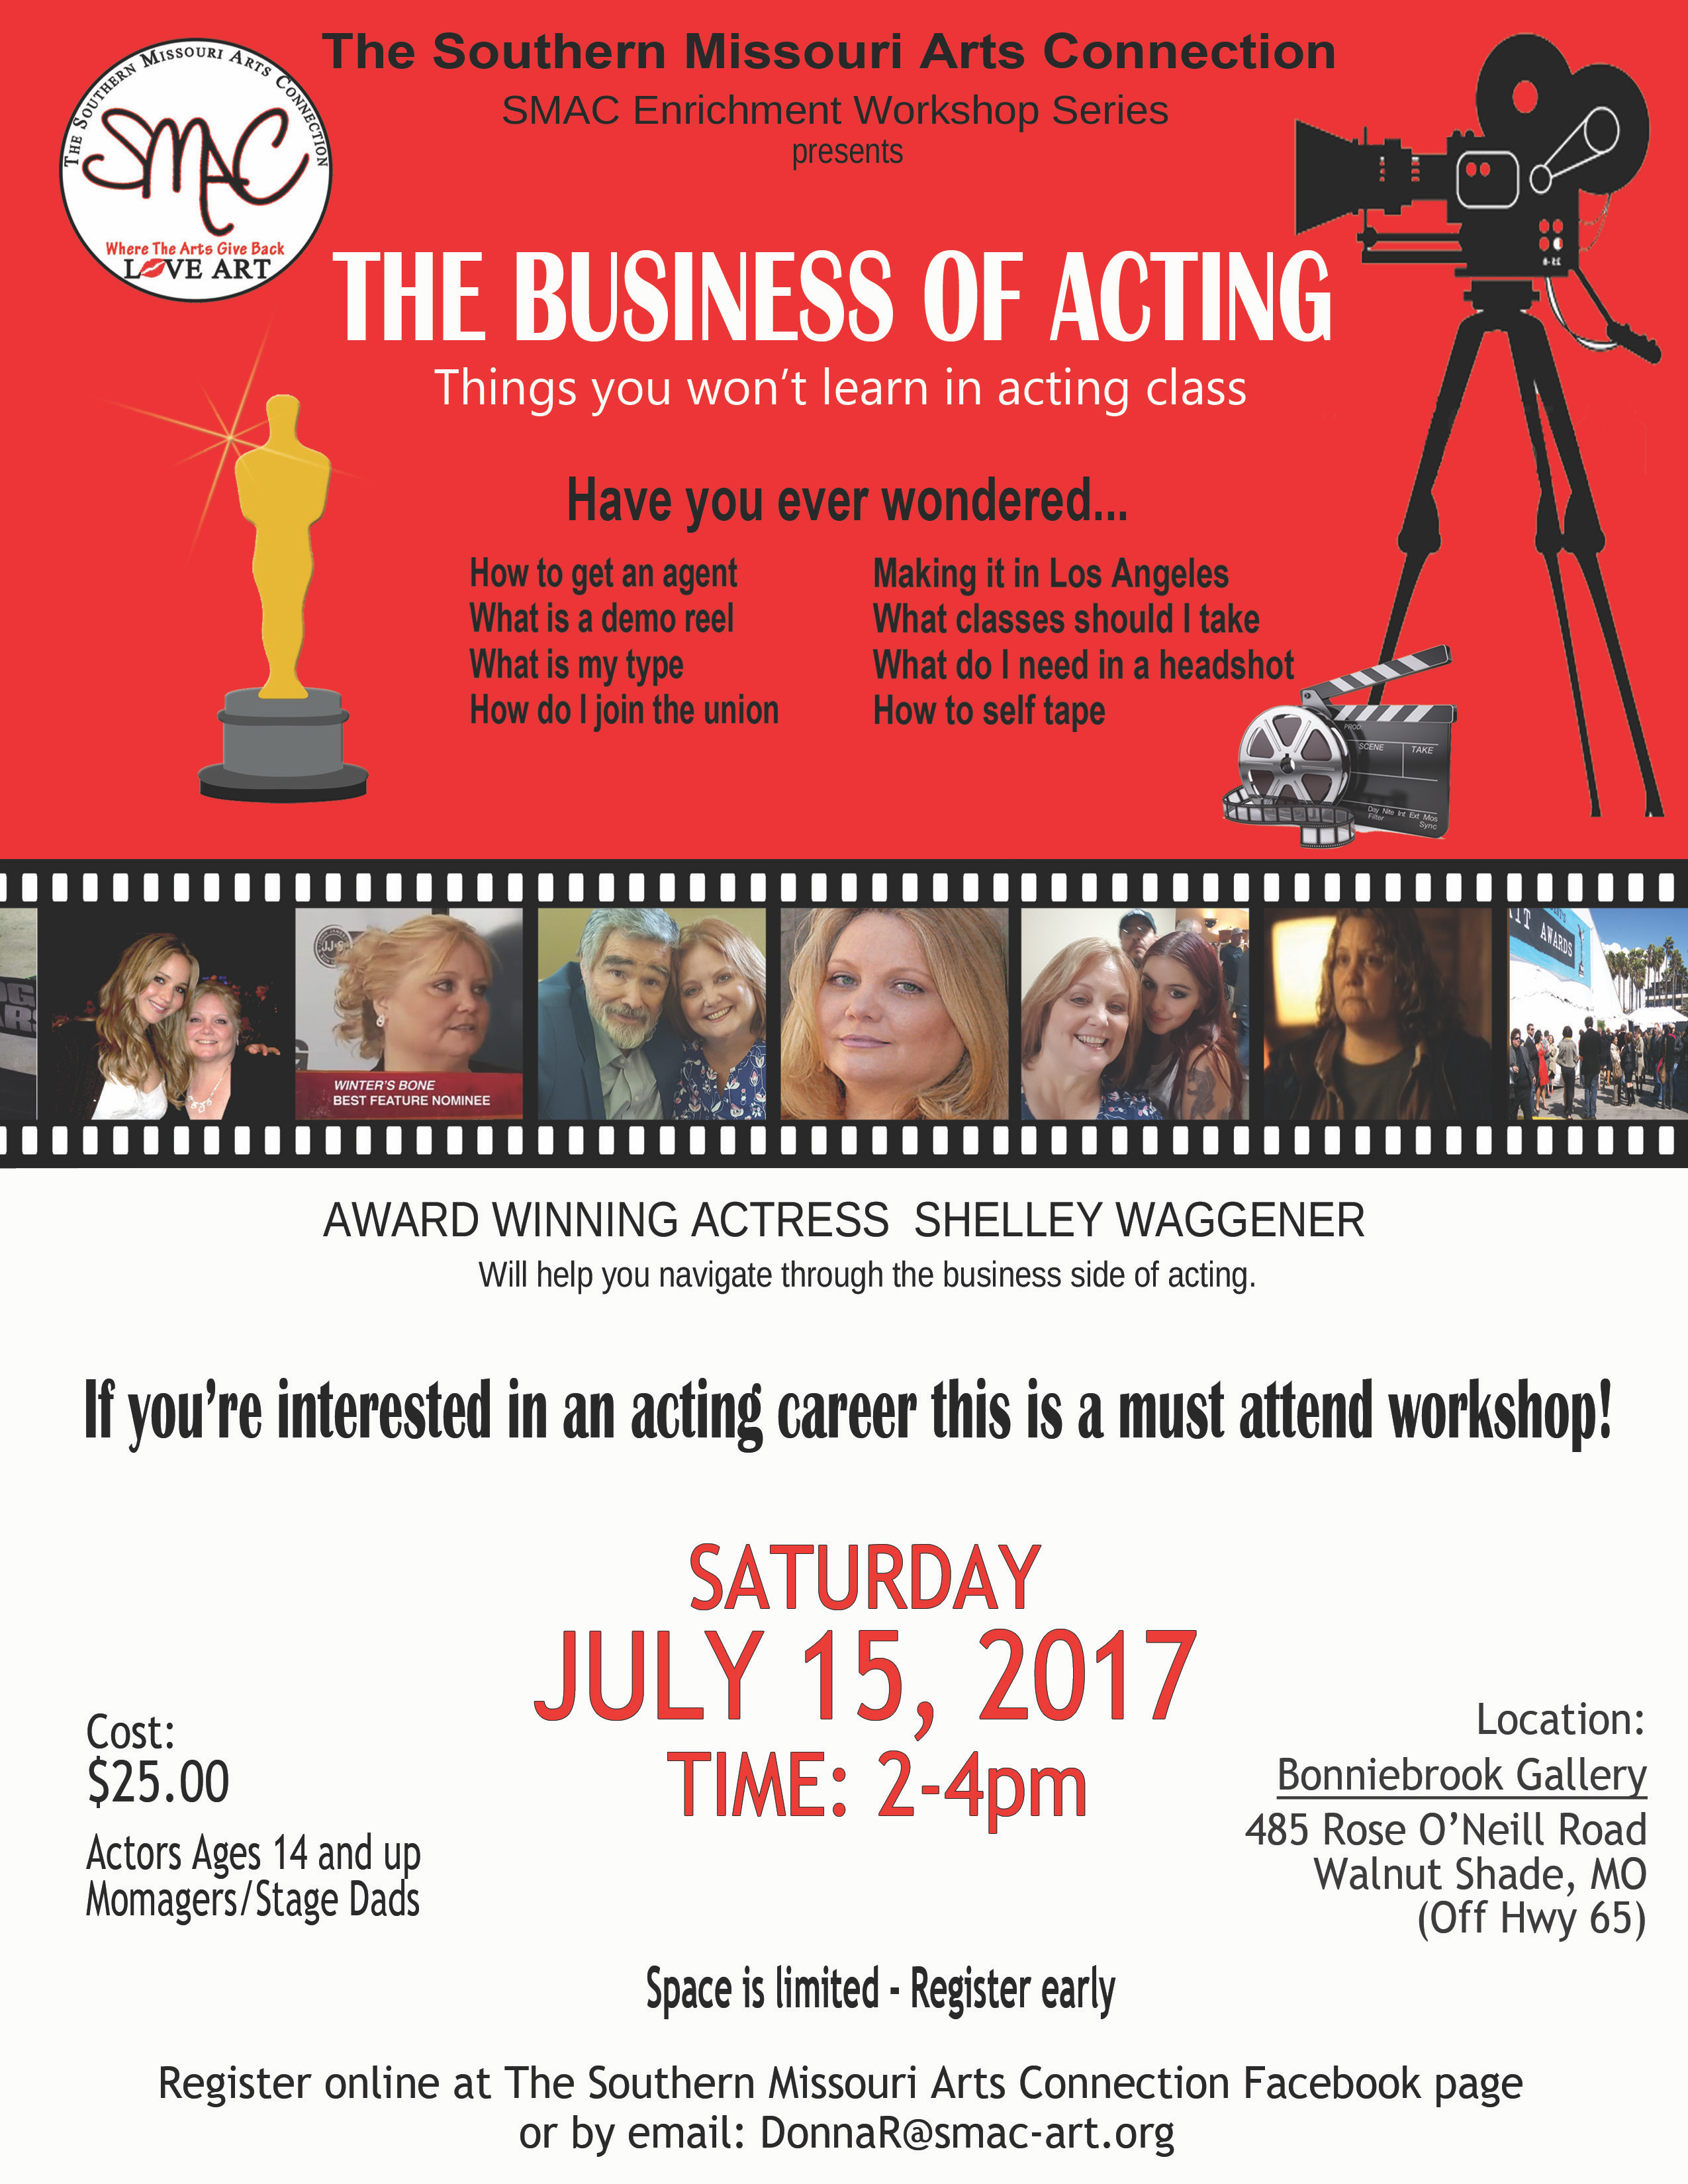 SMAC offers The Business of Acting